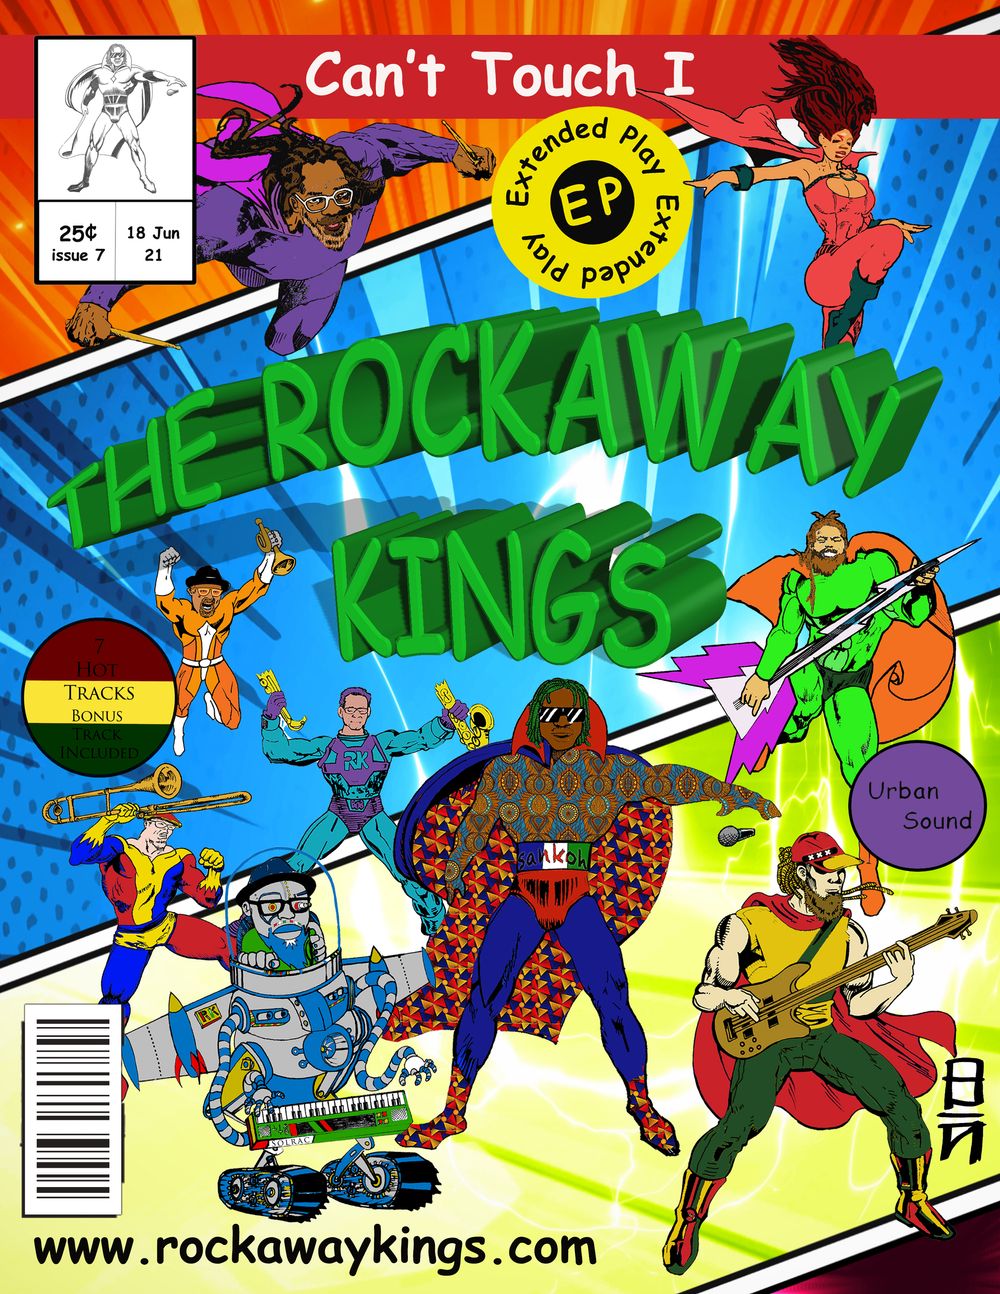  New Album "Can't Touch I" by Sankoh and The Rockaway Kings